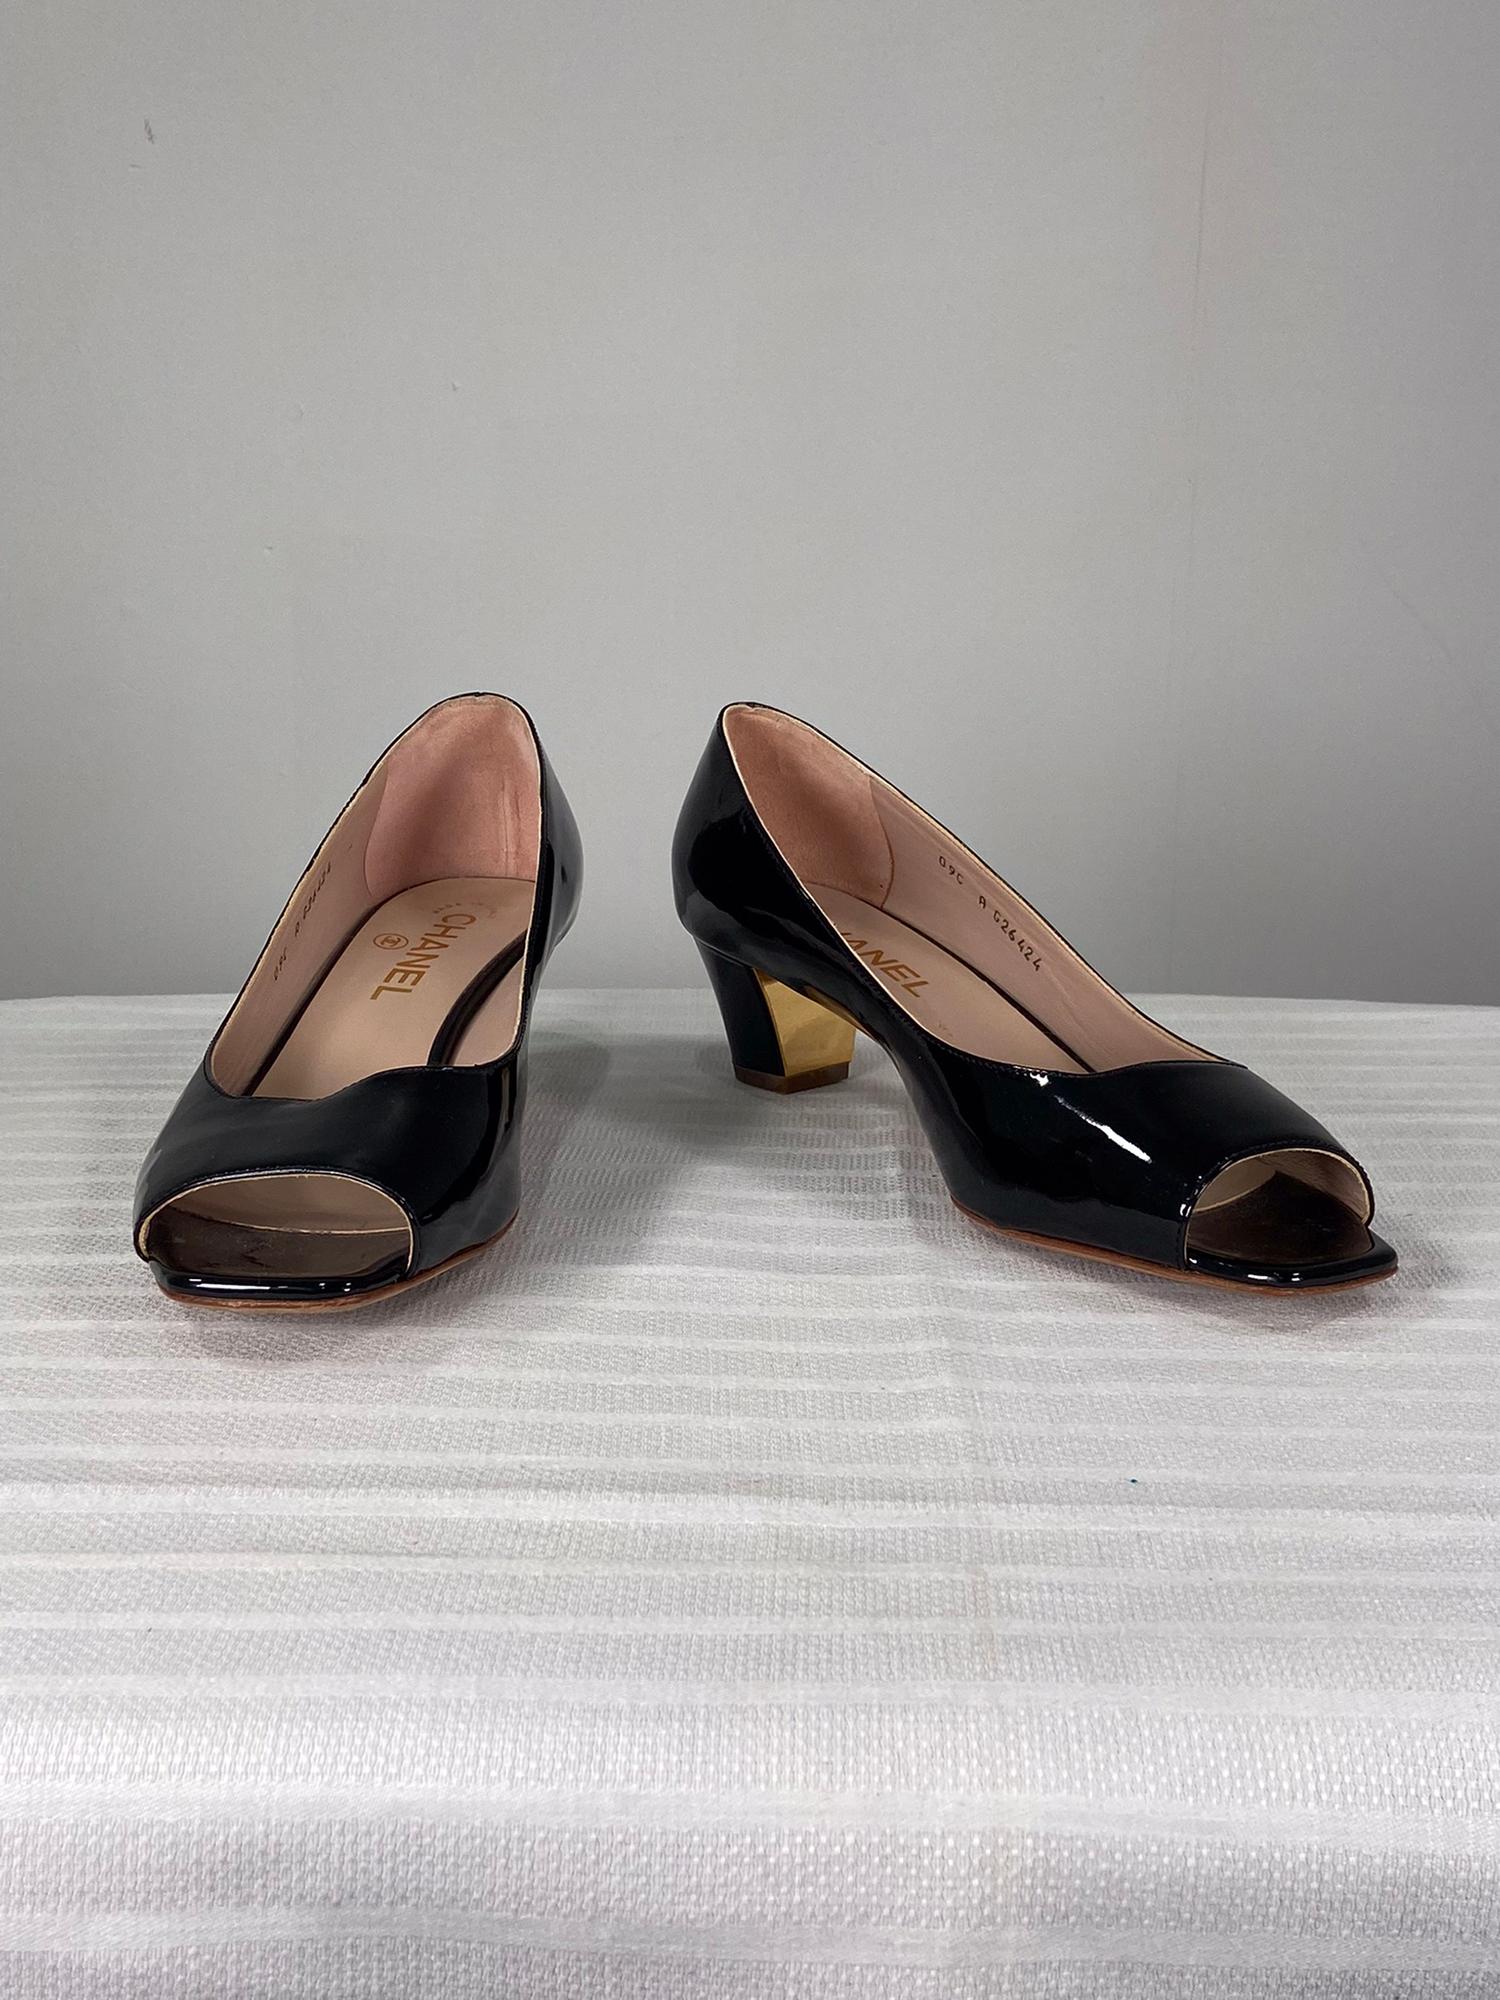 Chanel black patent leather open toe, gold logo heel pumps 39. Beautiful patent leather pumps with an open toe and a low chunky heel which has a gold vertical stripe and a raised CC logo. Marked size 39. In very good pre-owned condition, soles have